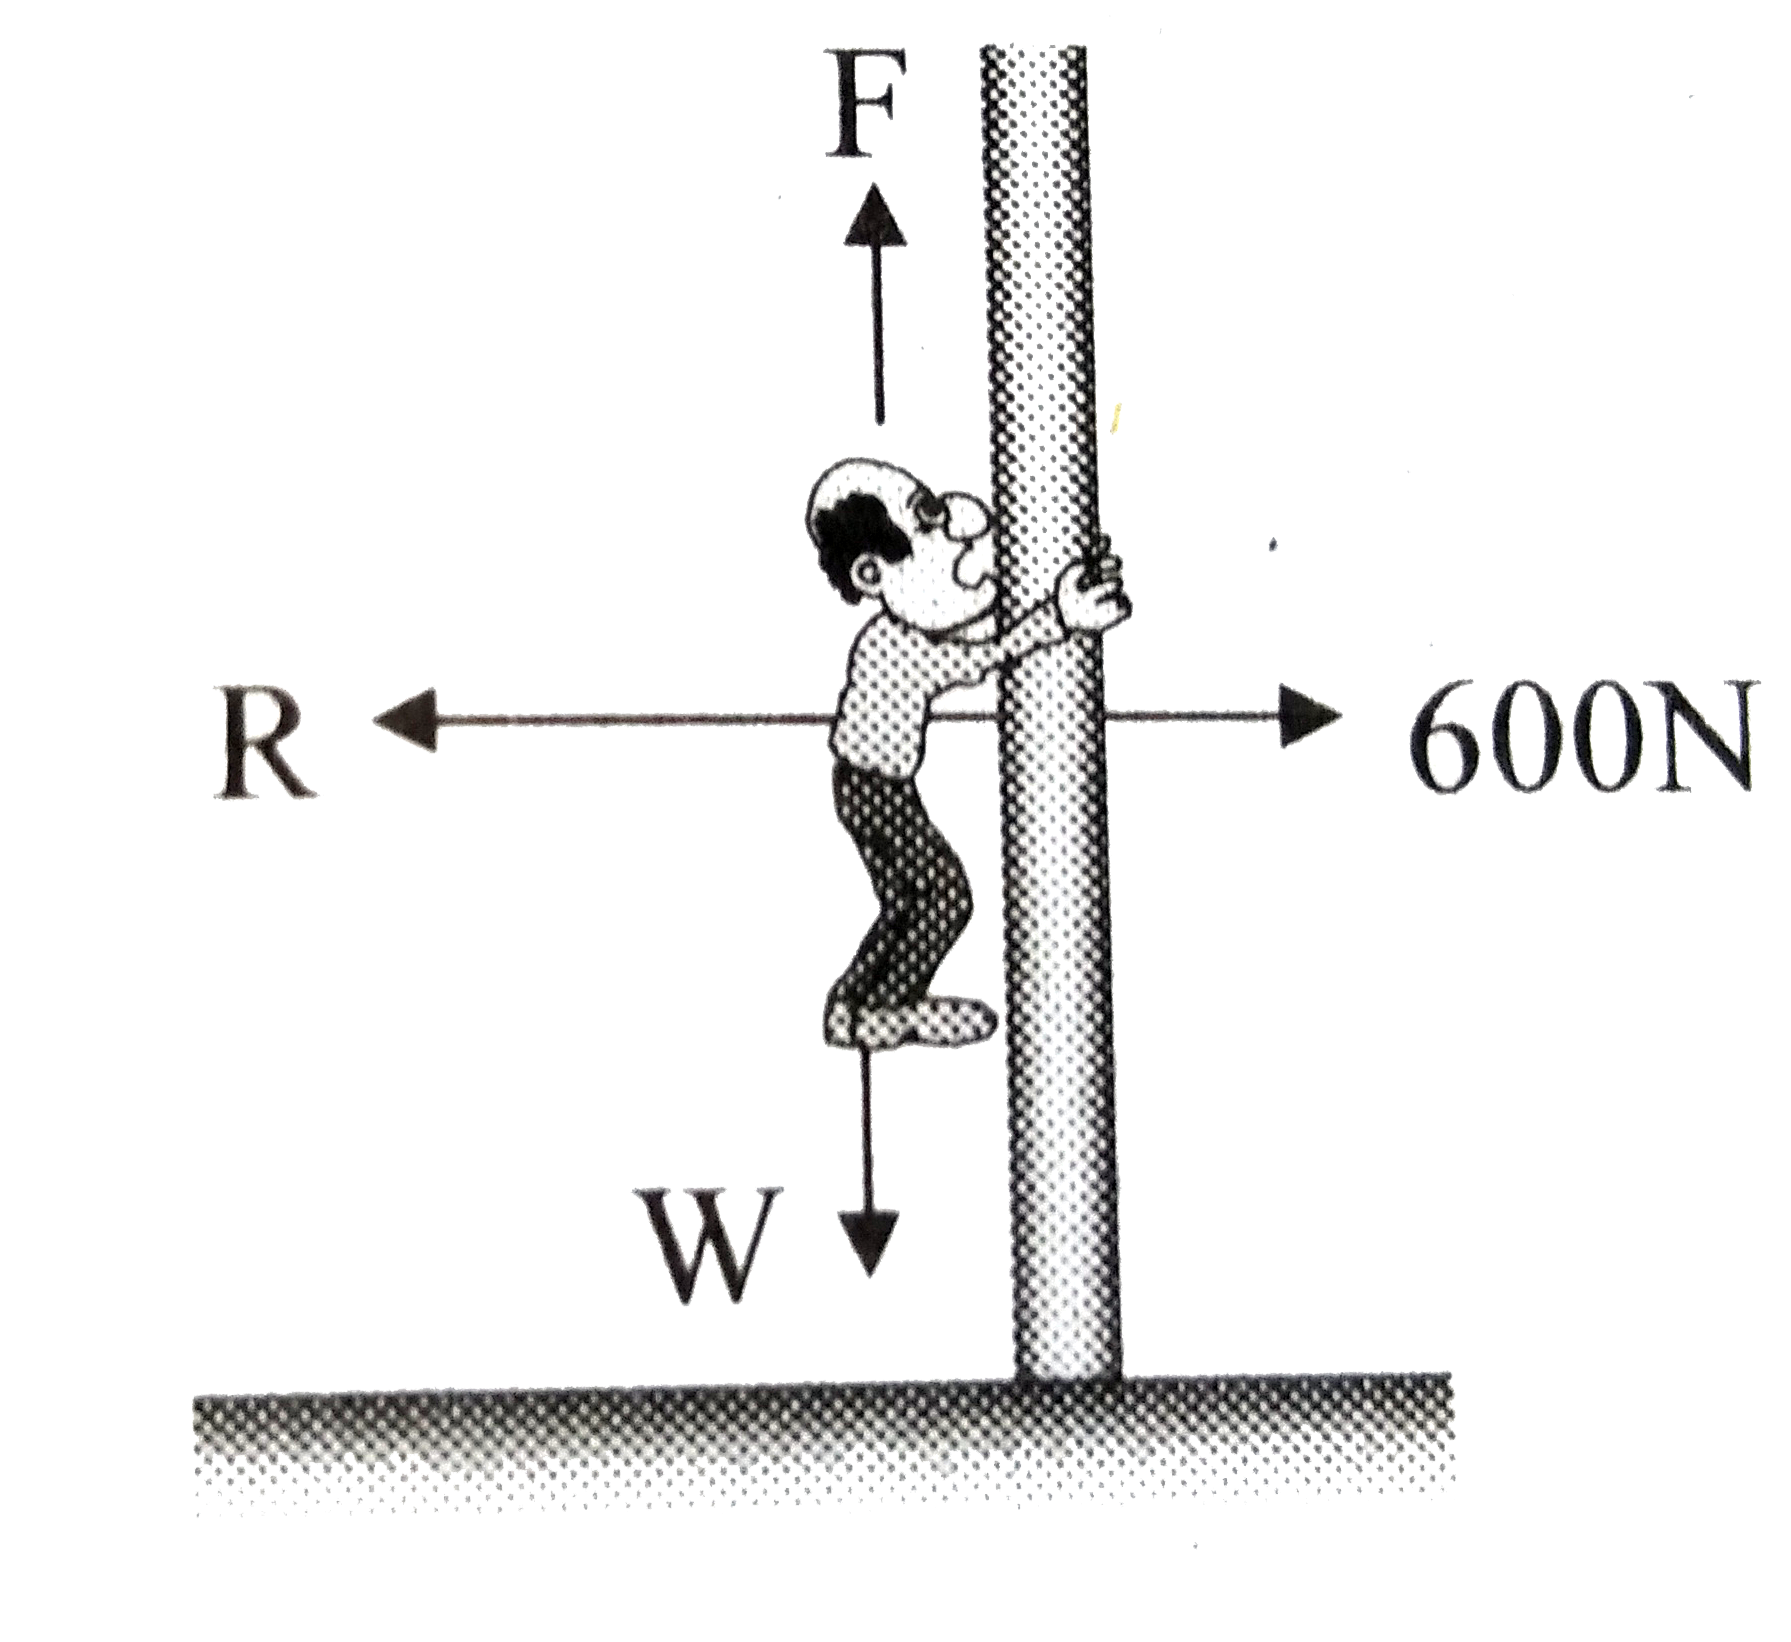 A fireman of mass 60 kg slides down a pole. As shown in figure. He is pressing the pole with a force of 600 N. The coefficient of friction between the hands and the pole is 0.5. With wht acceleration will the fireman slide down (g=10 m//s^(2))